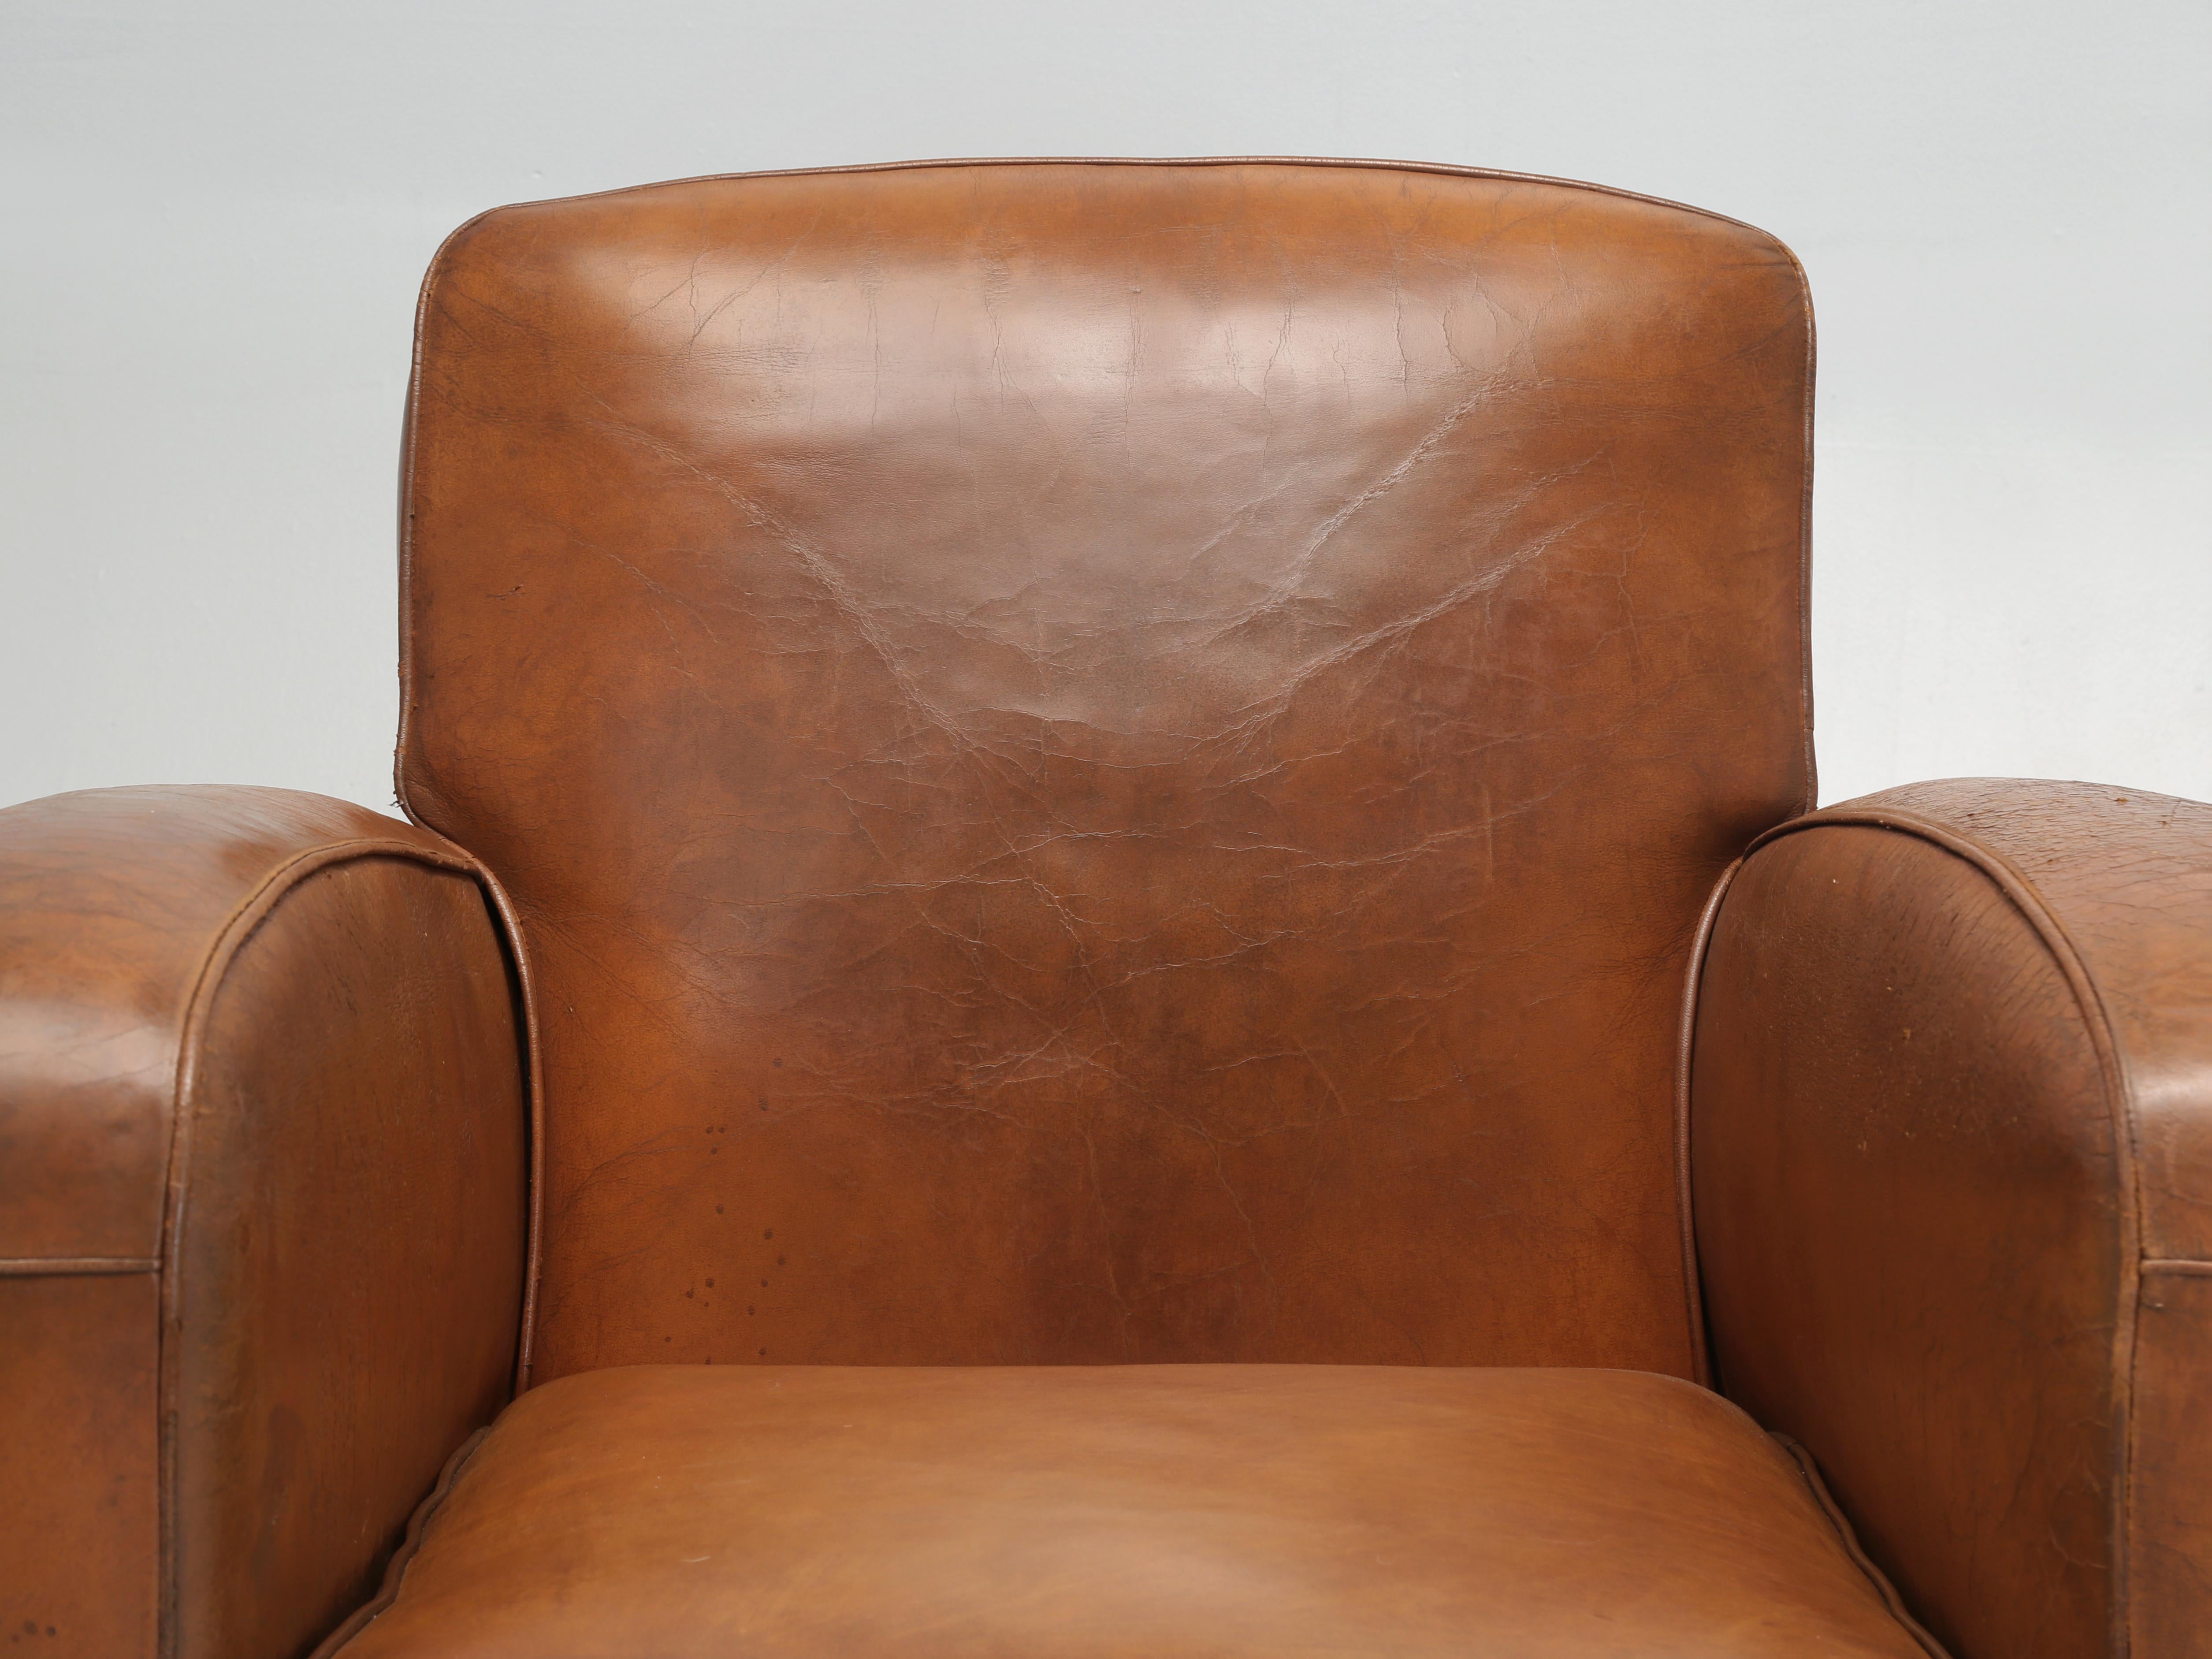 Hand-Crafted French Club Chairs Original Leather Completely Restored Internally in Horsehair